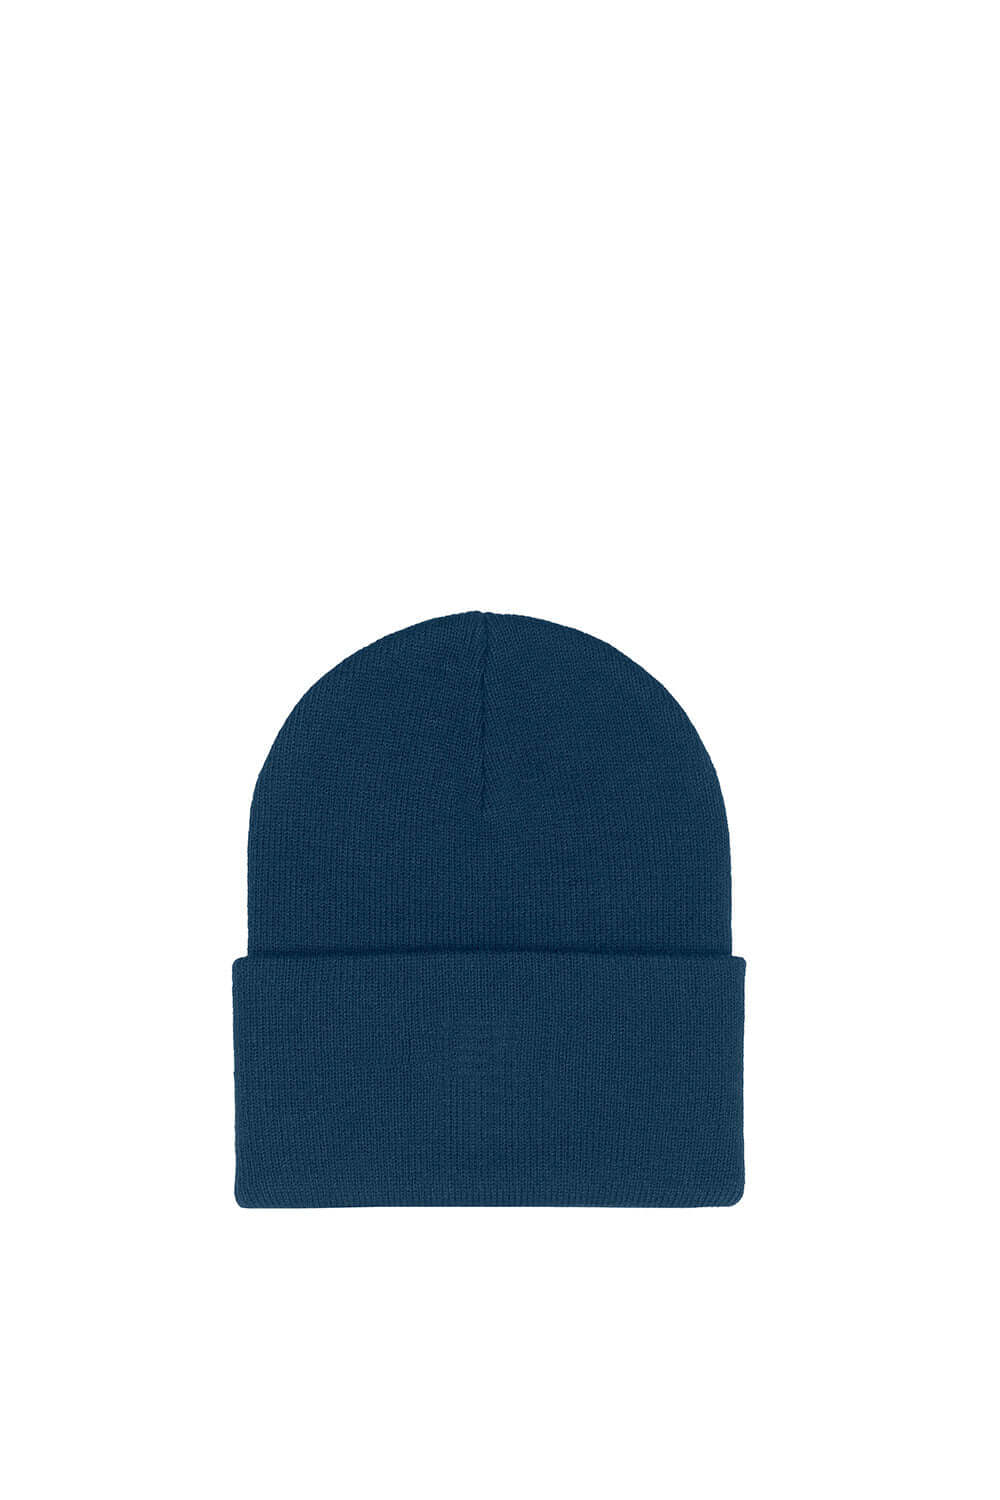 HTC LOGO BEANIE WARM WINTER HTC Los Angeles shield logo embroidered on the front. One size fit all. Color: Blue Navy HTC LOS ANGELES